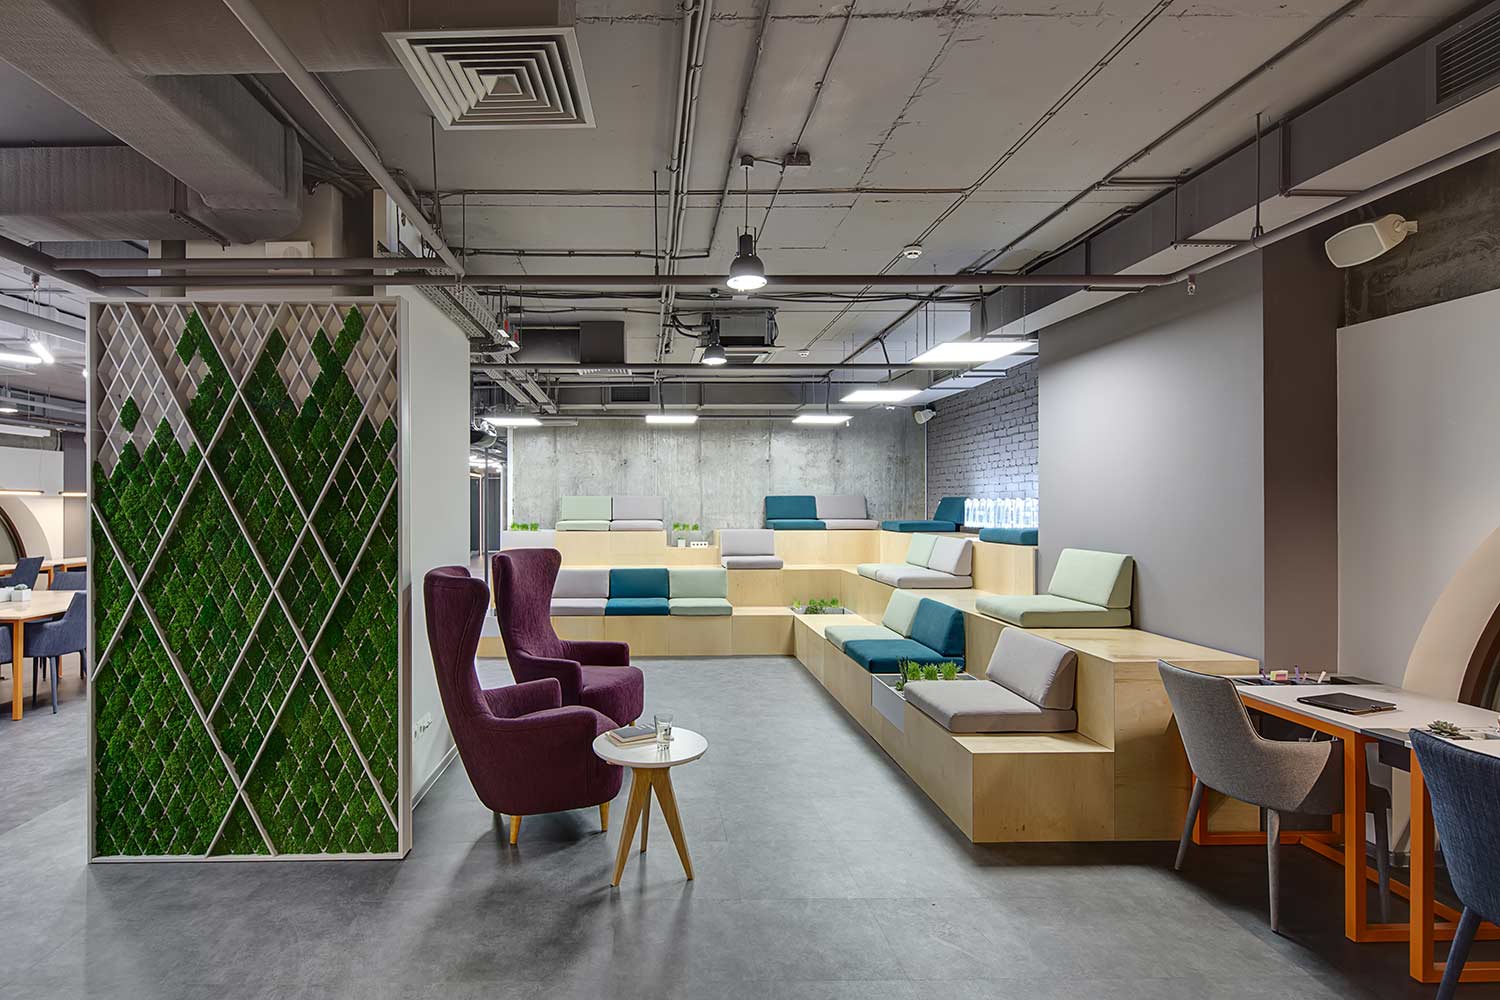 key considerations in office design and office furniture selection for a covid secure workplace